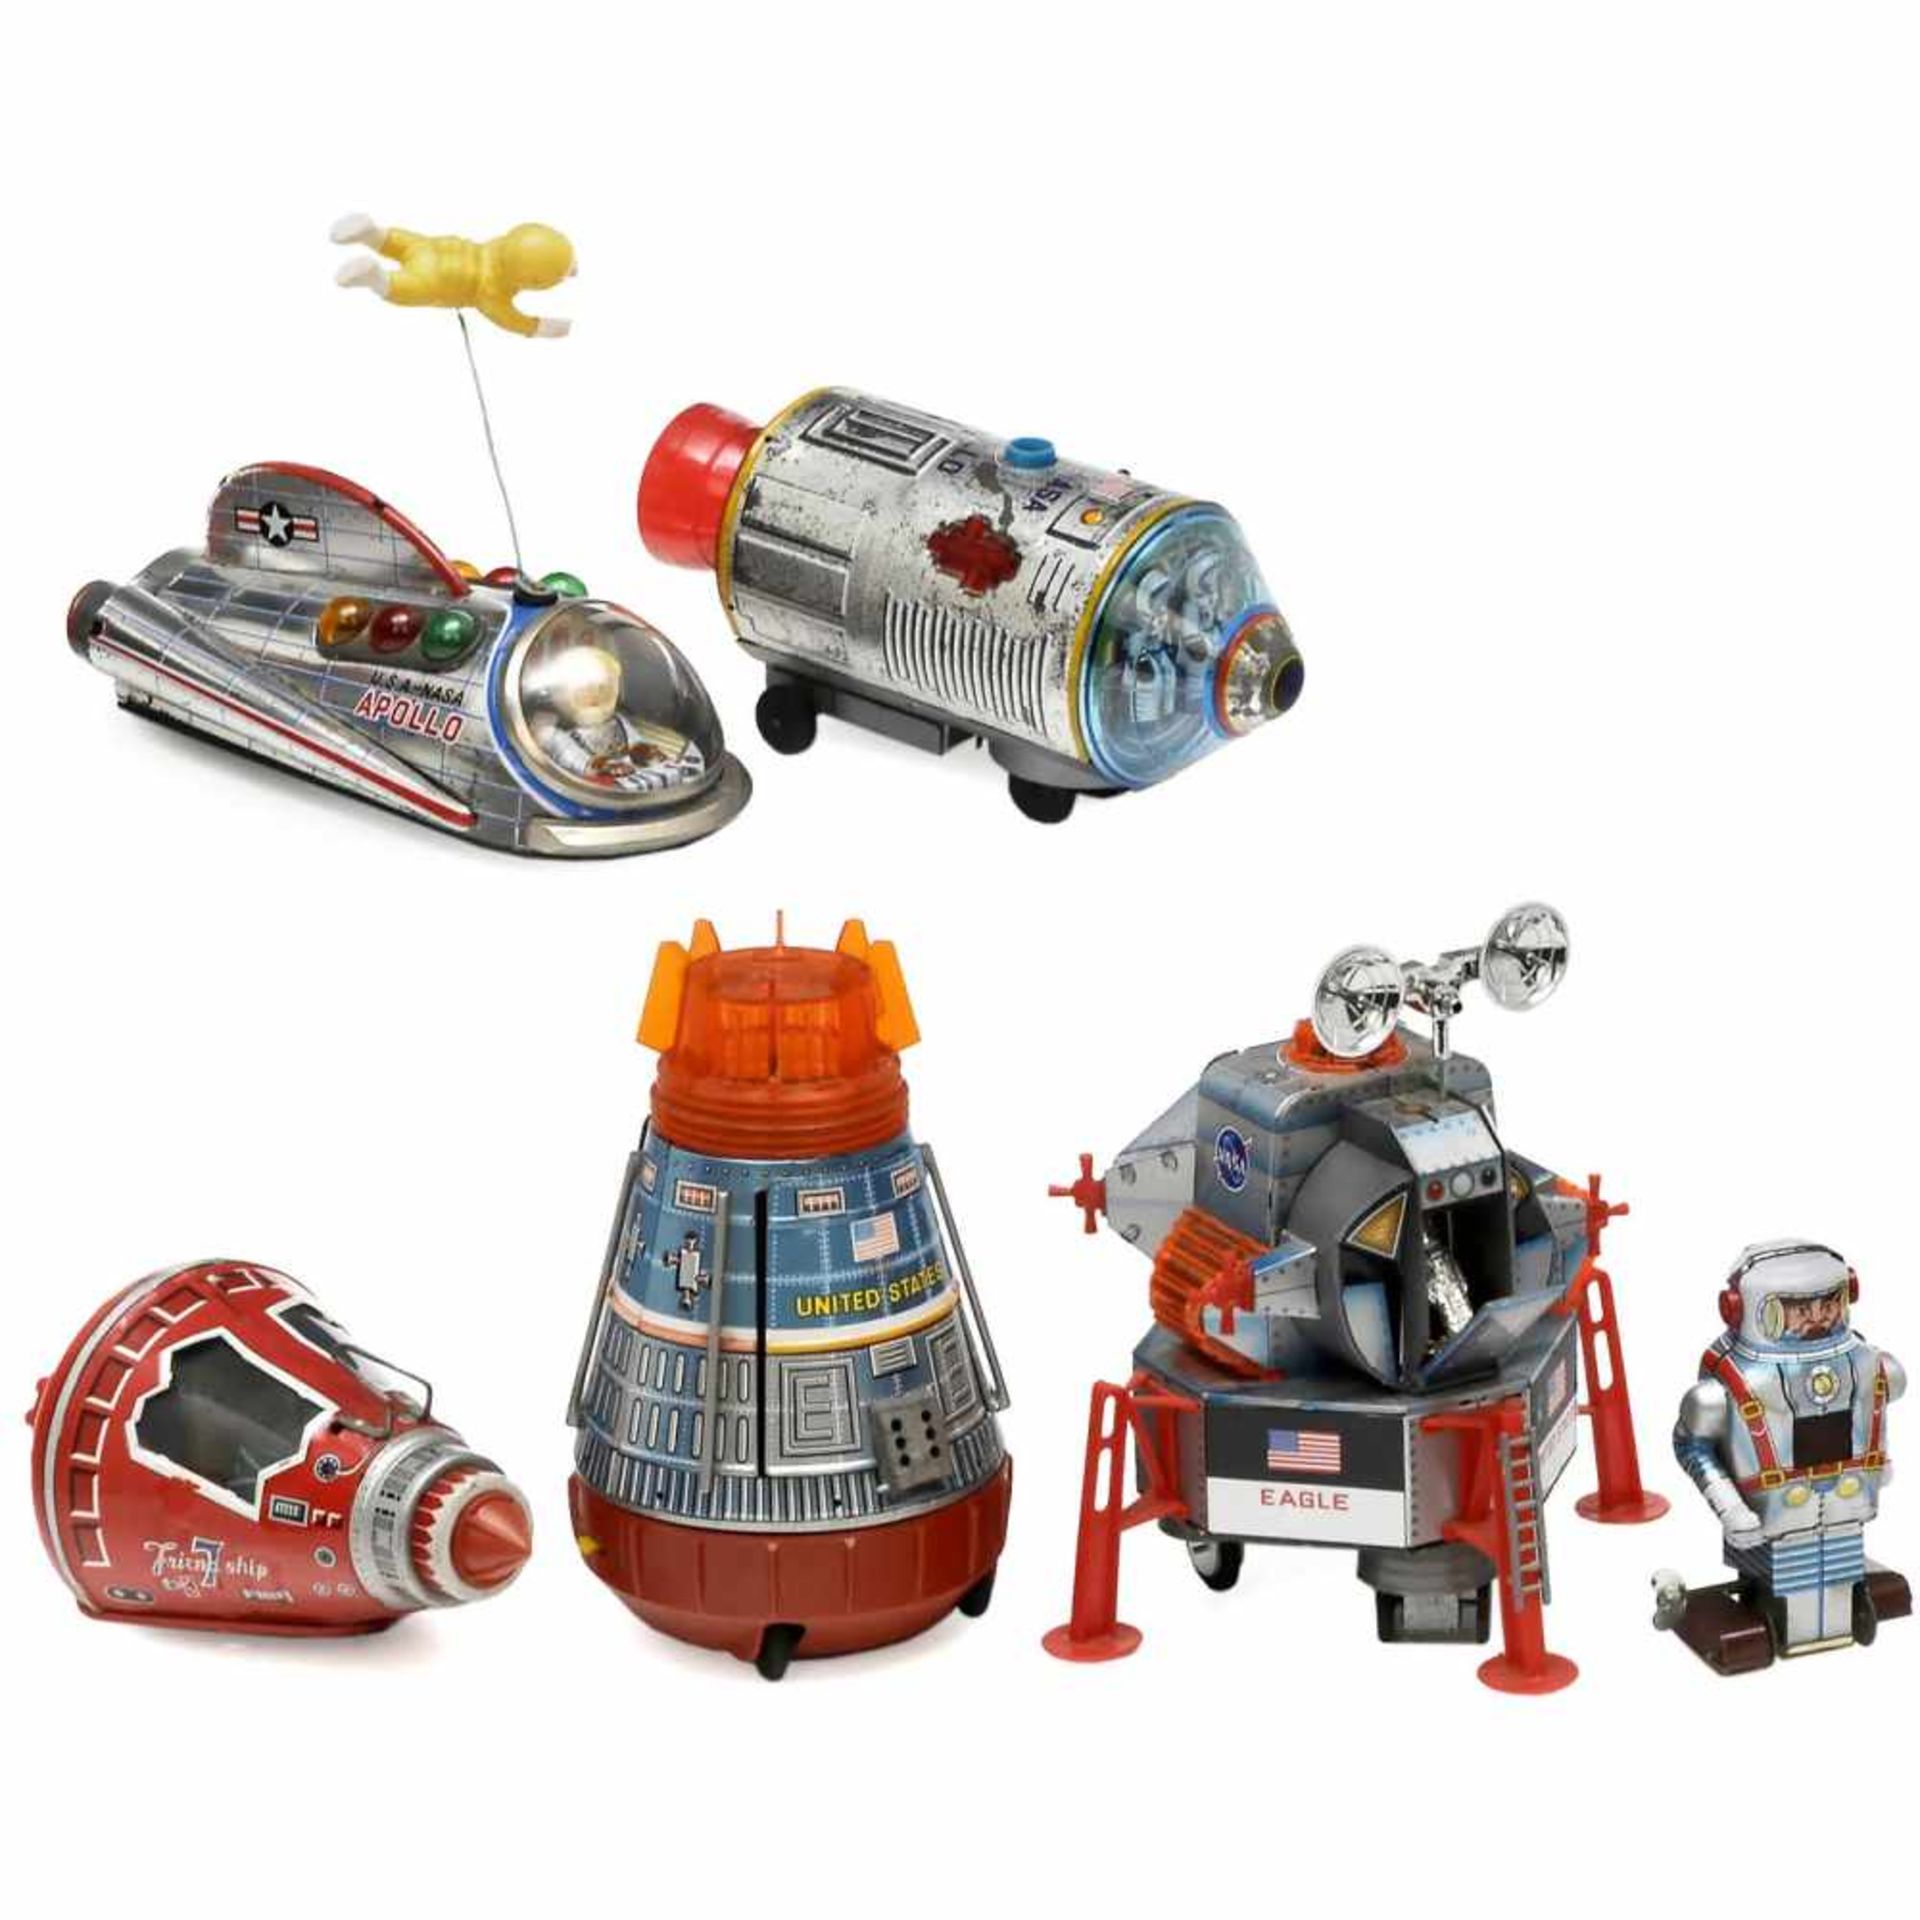 Japanese Space Toys, c. 1960-70Lithographed tin and plastic. 1) Friend Ship, SH Horikawa,